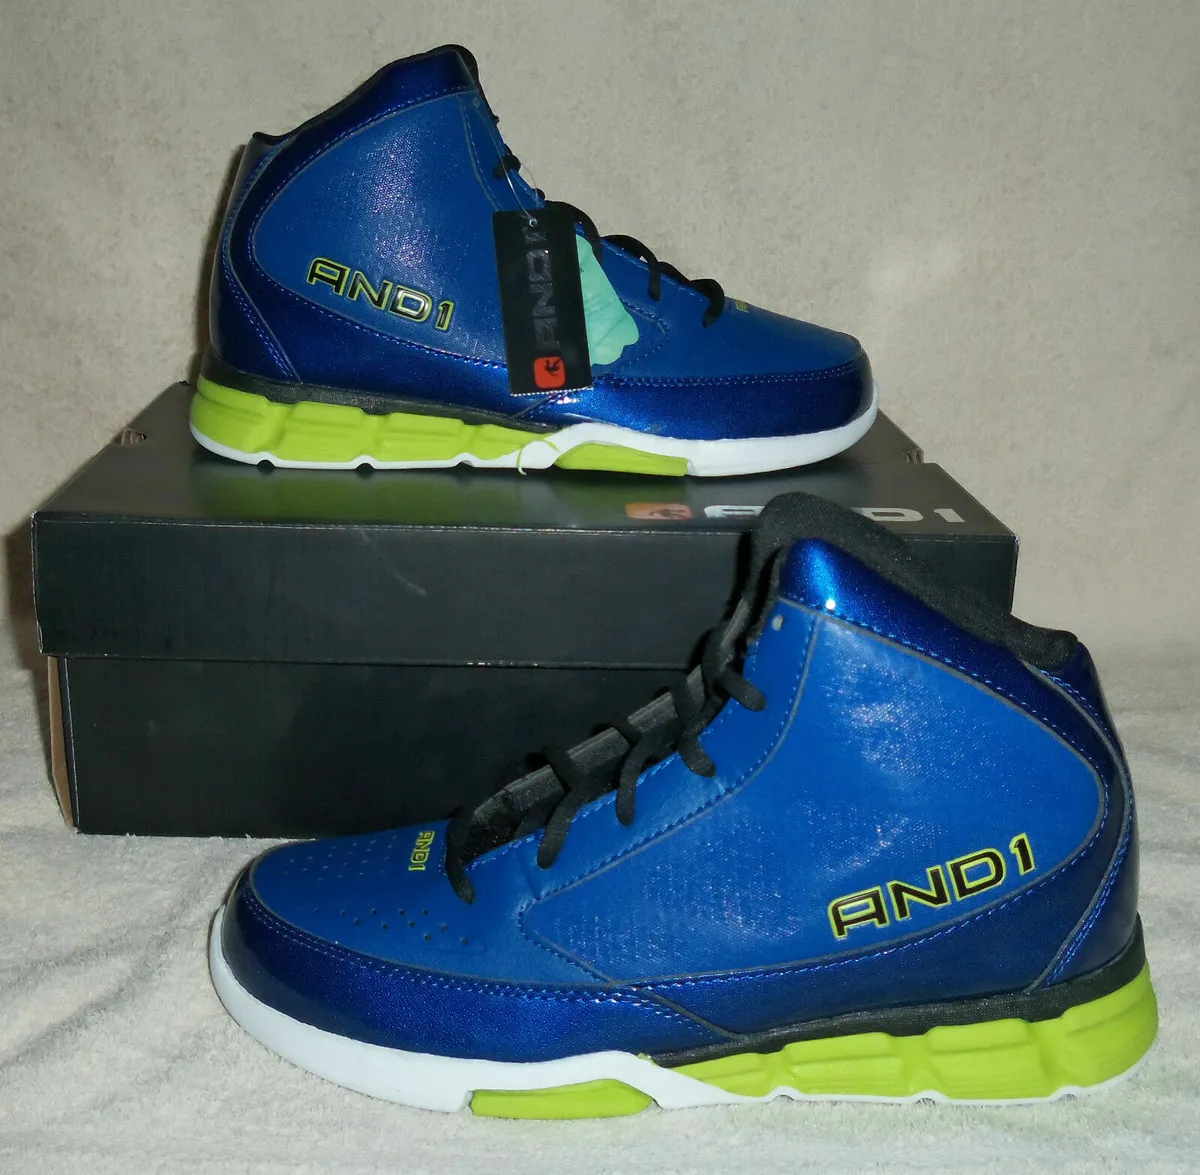 informal muerto Persona con experiencia AND1 Basketball Boots / Trainers - Blitz Blue / Lime - New in Box | eBay